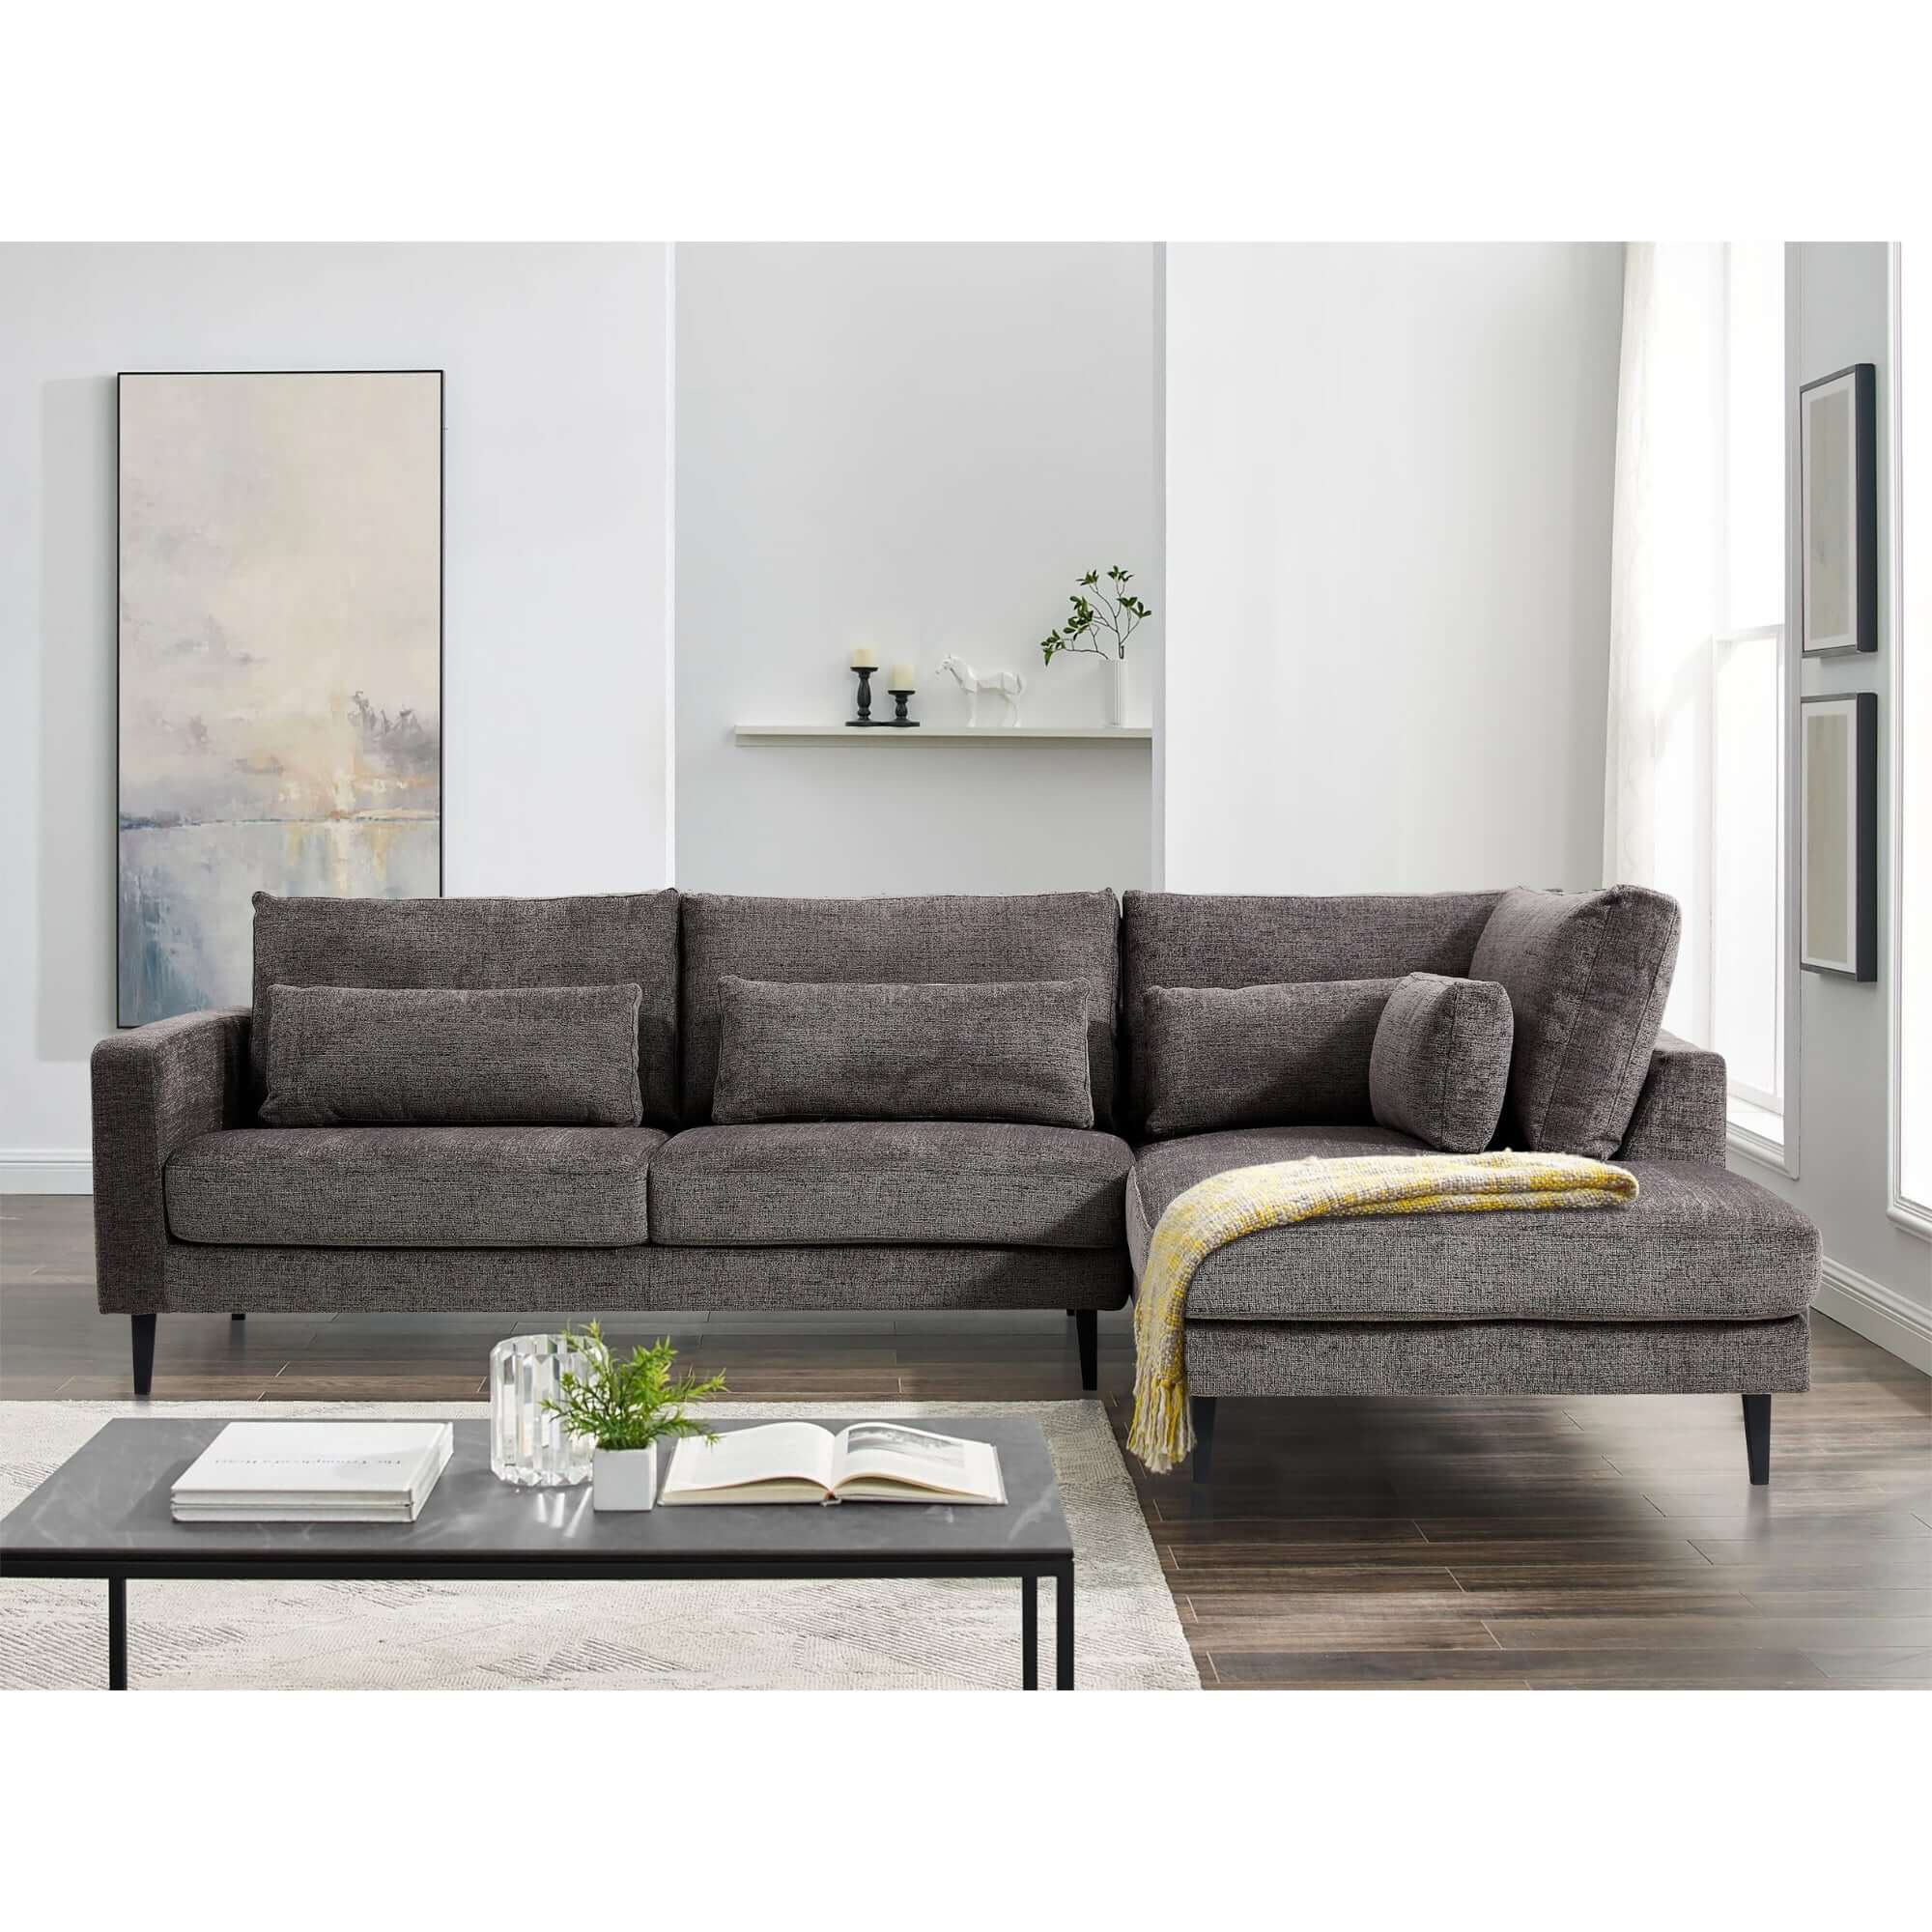 Kaylee Mink 2-Seater Sofa with Chaise Lounge-Upinteriors